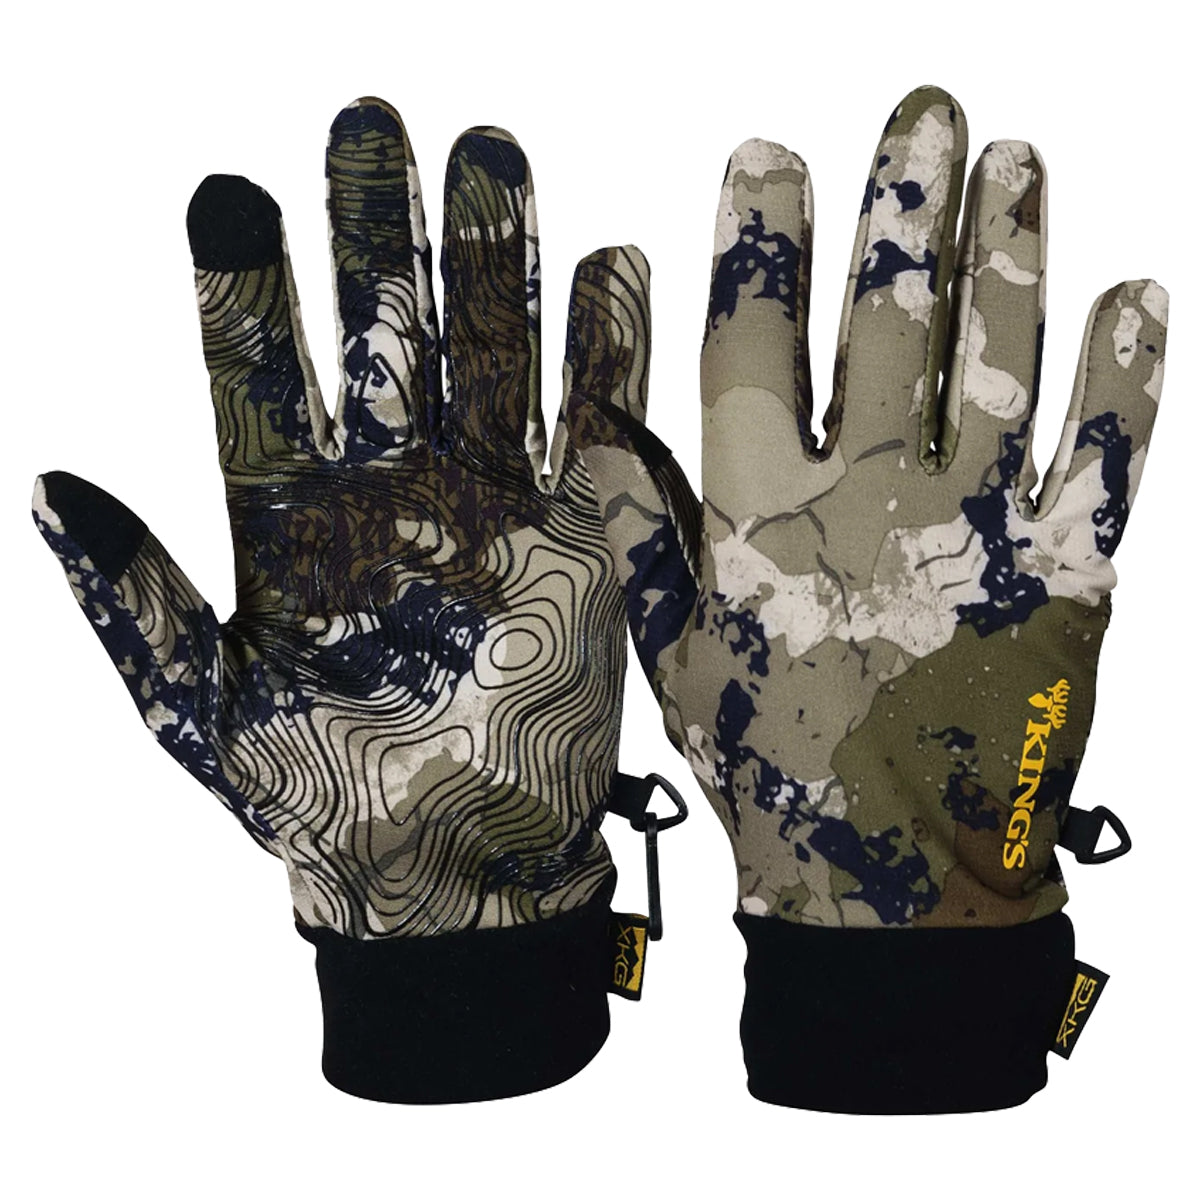 King's XKG Light Weight Glove in XK7 by GOHUNT | King's - GOHUNT Shop